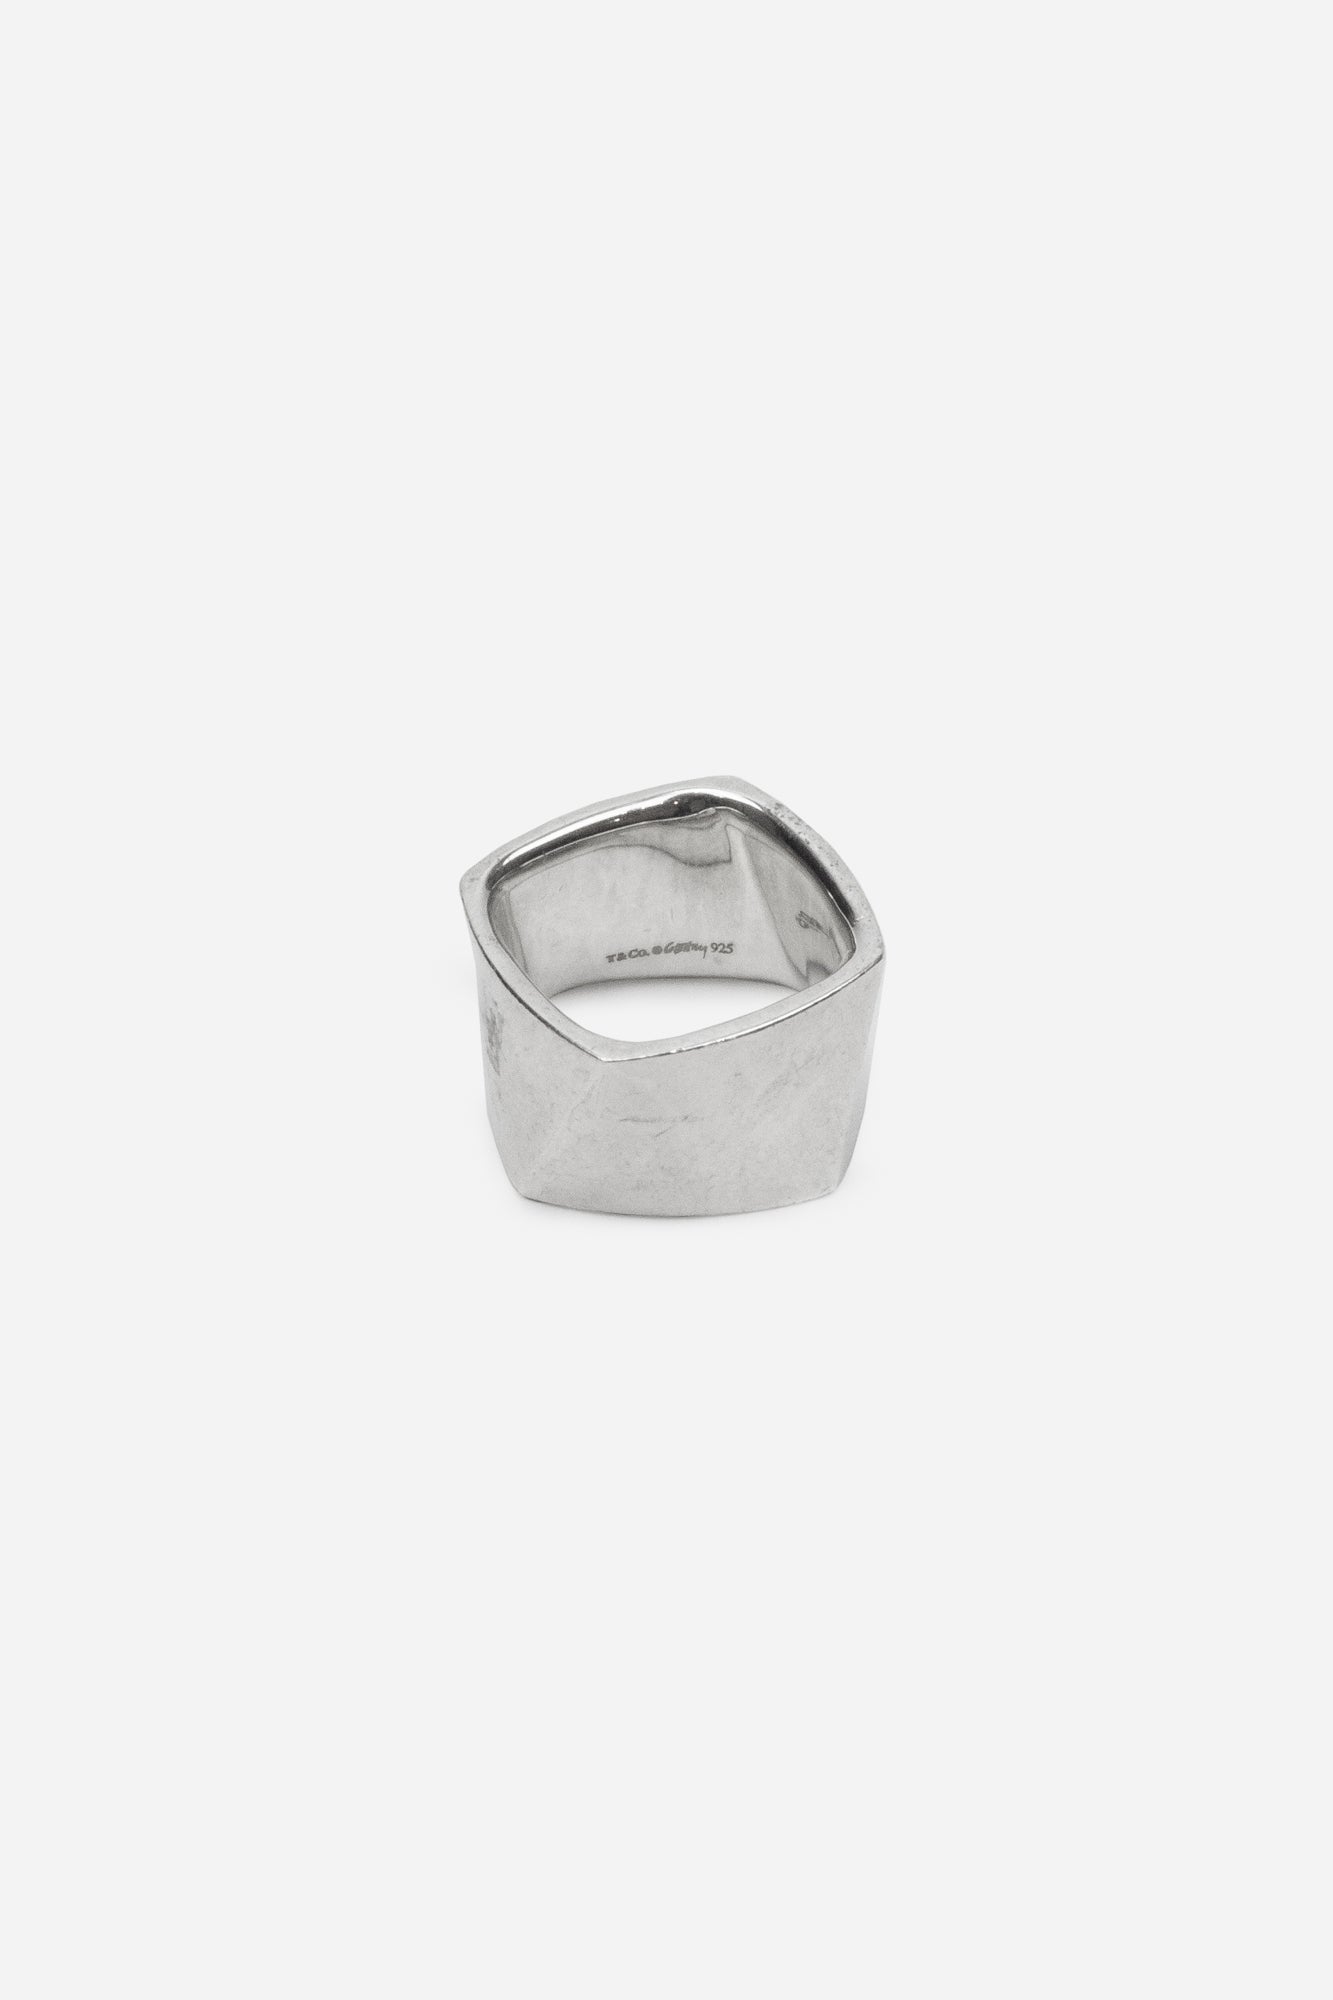 Silver Frank Gehry Torque Ring